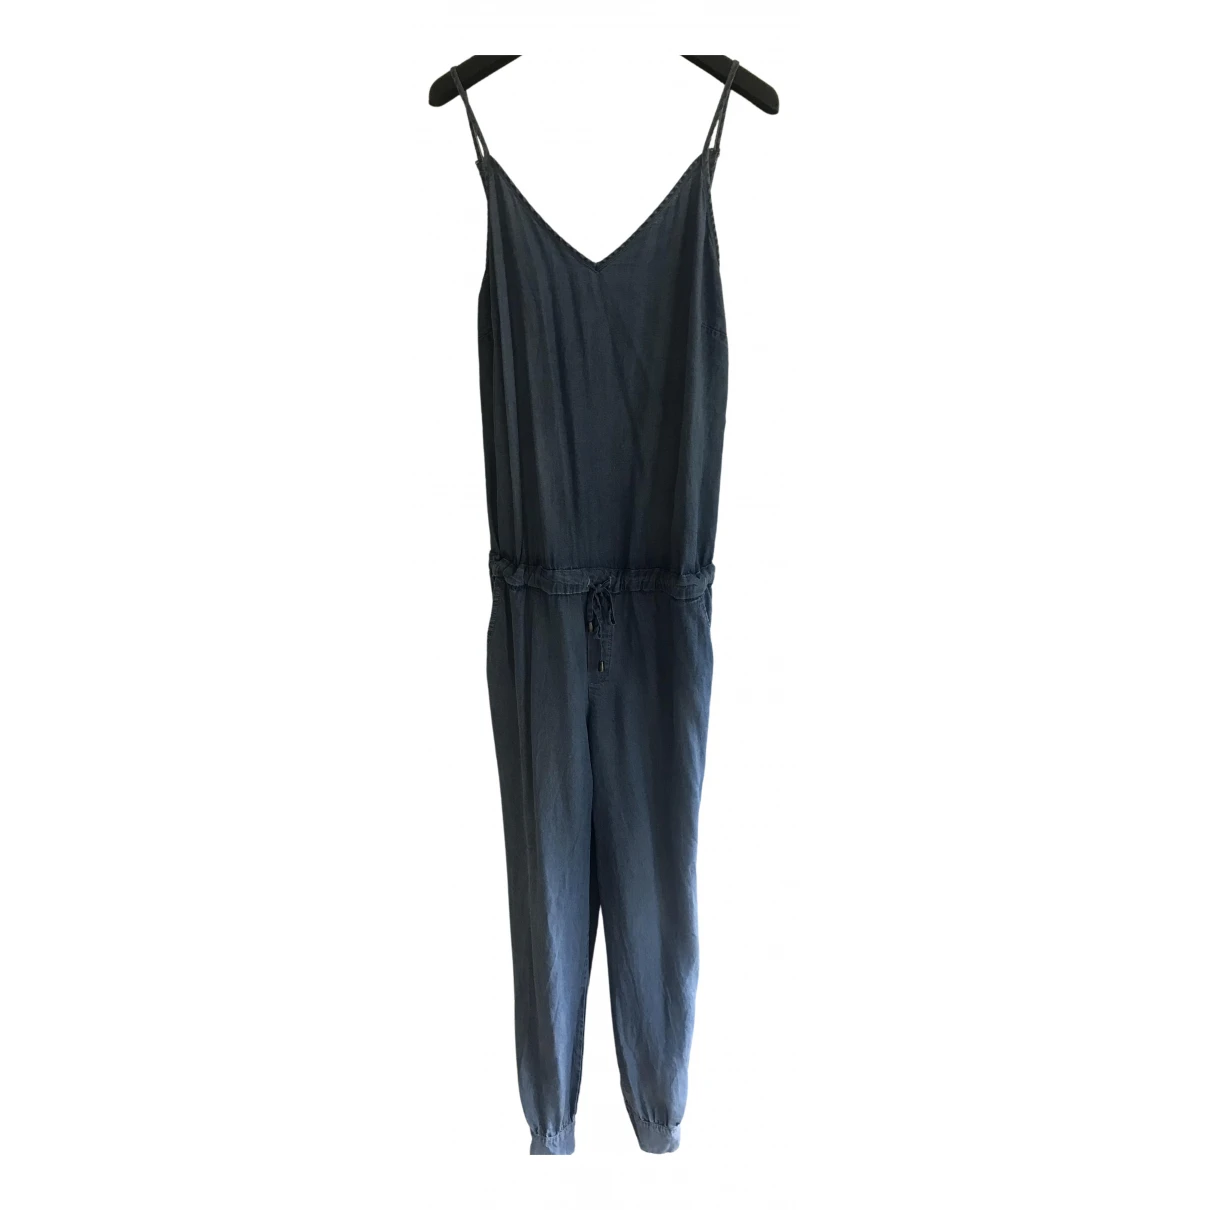 clothing Splendid jumpsuits for Female Denim - Jeans M International. Used condition